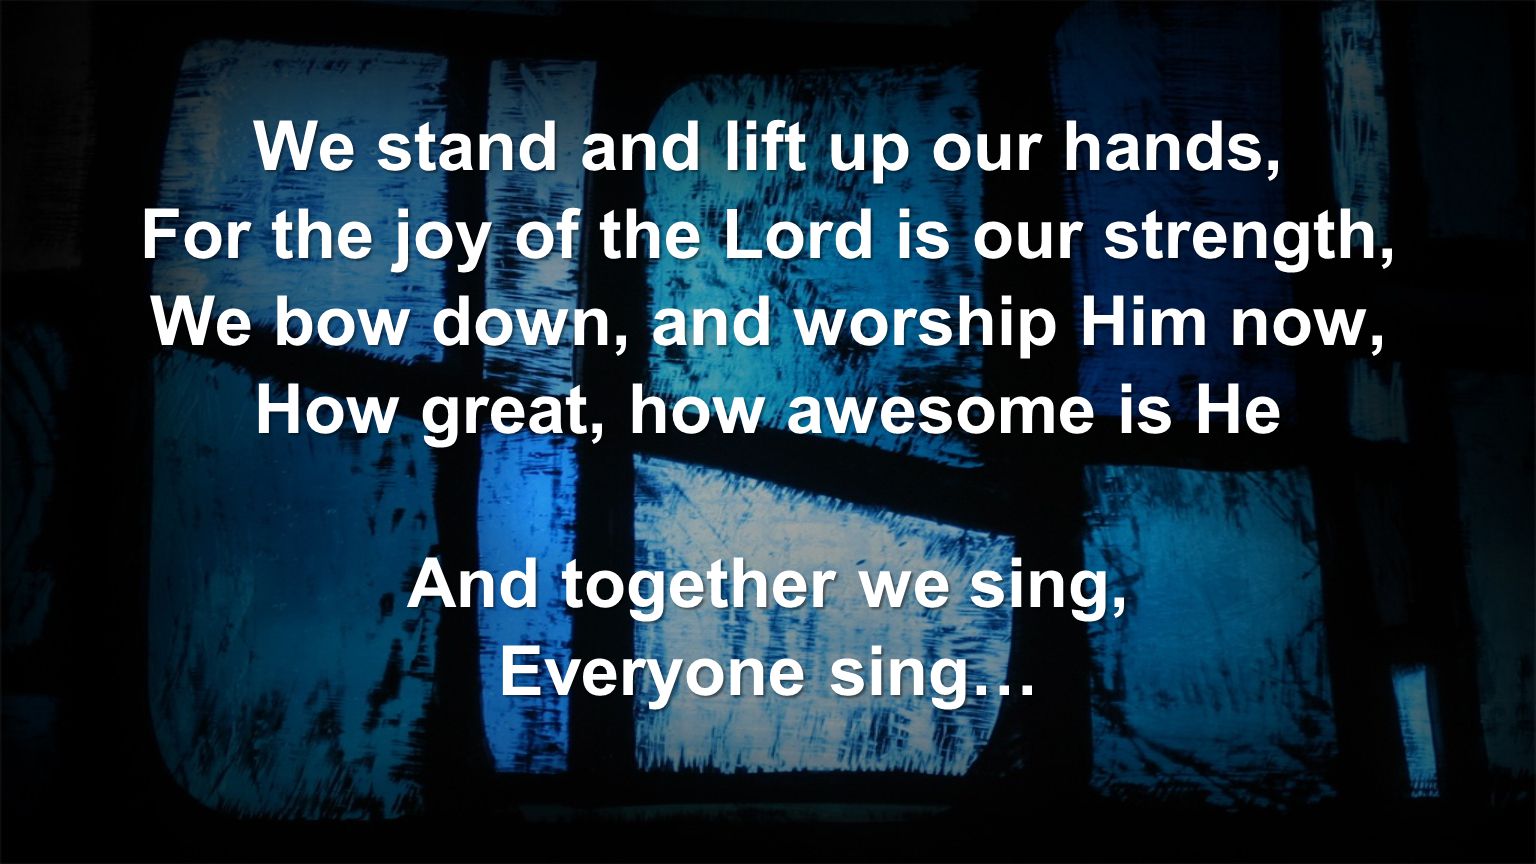 We stand and lift up our hands,